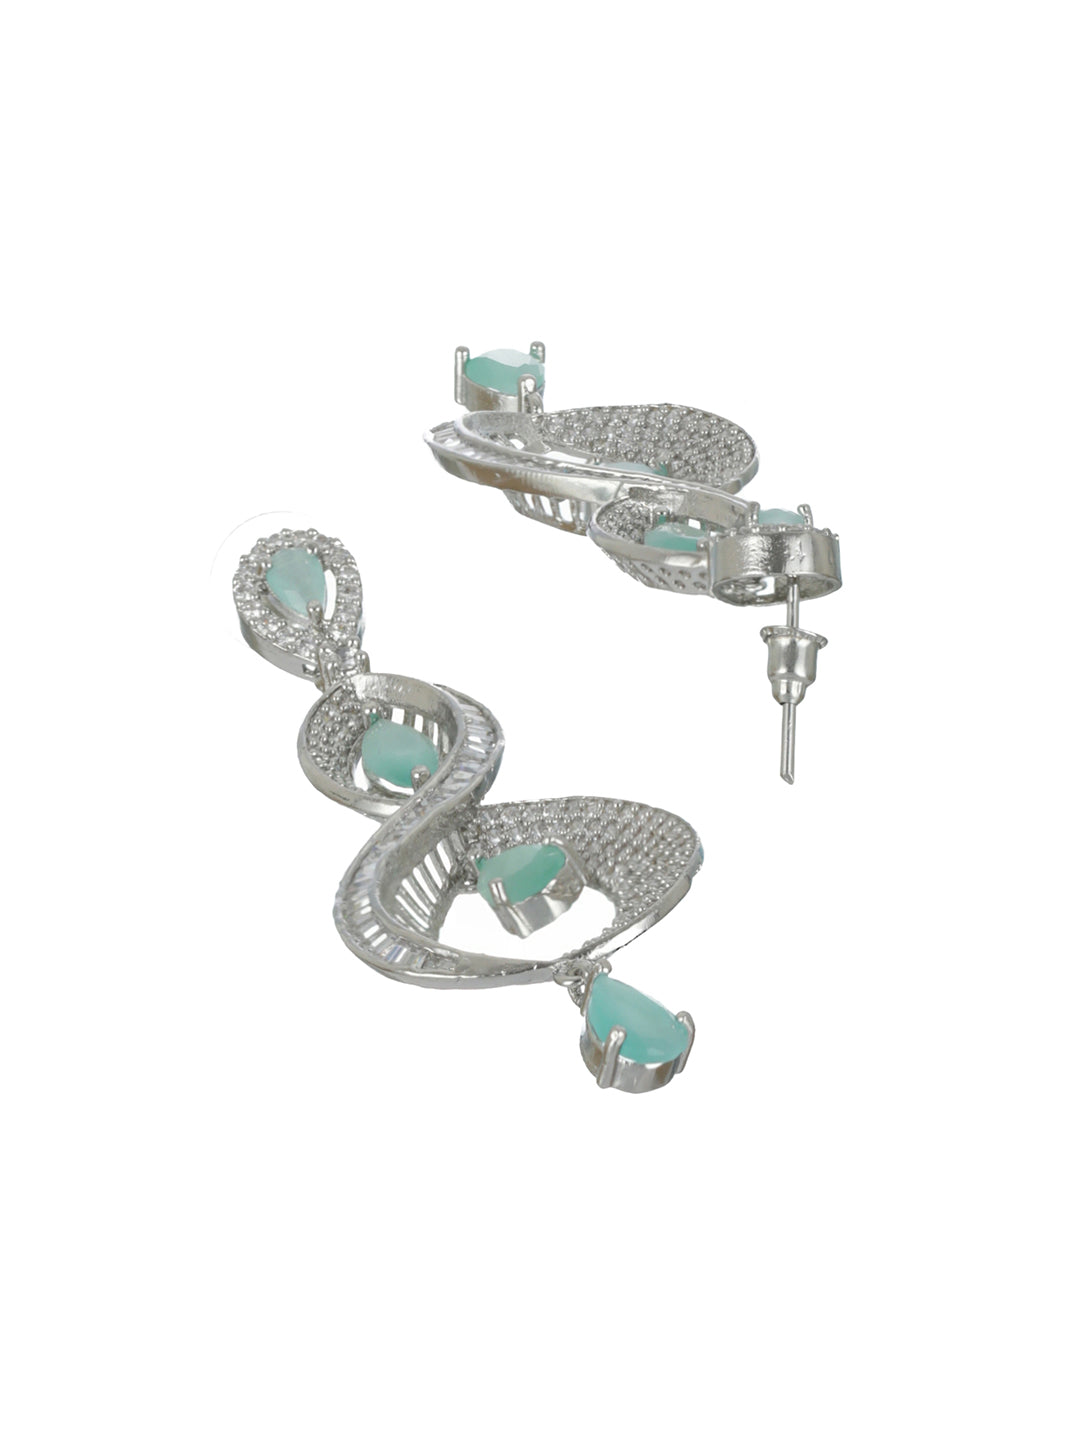 Priyaasi Mint Green Twisted AD Silver-Plated Drop Earrings